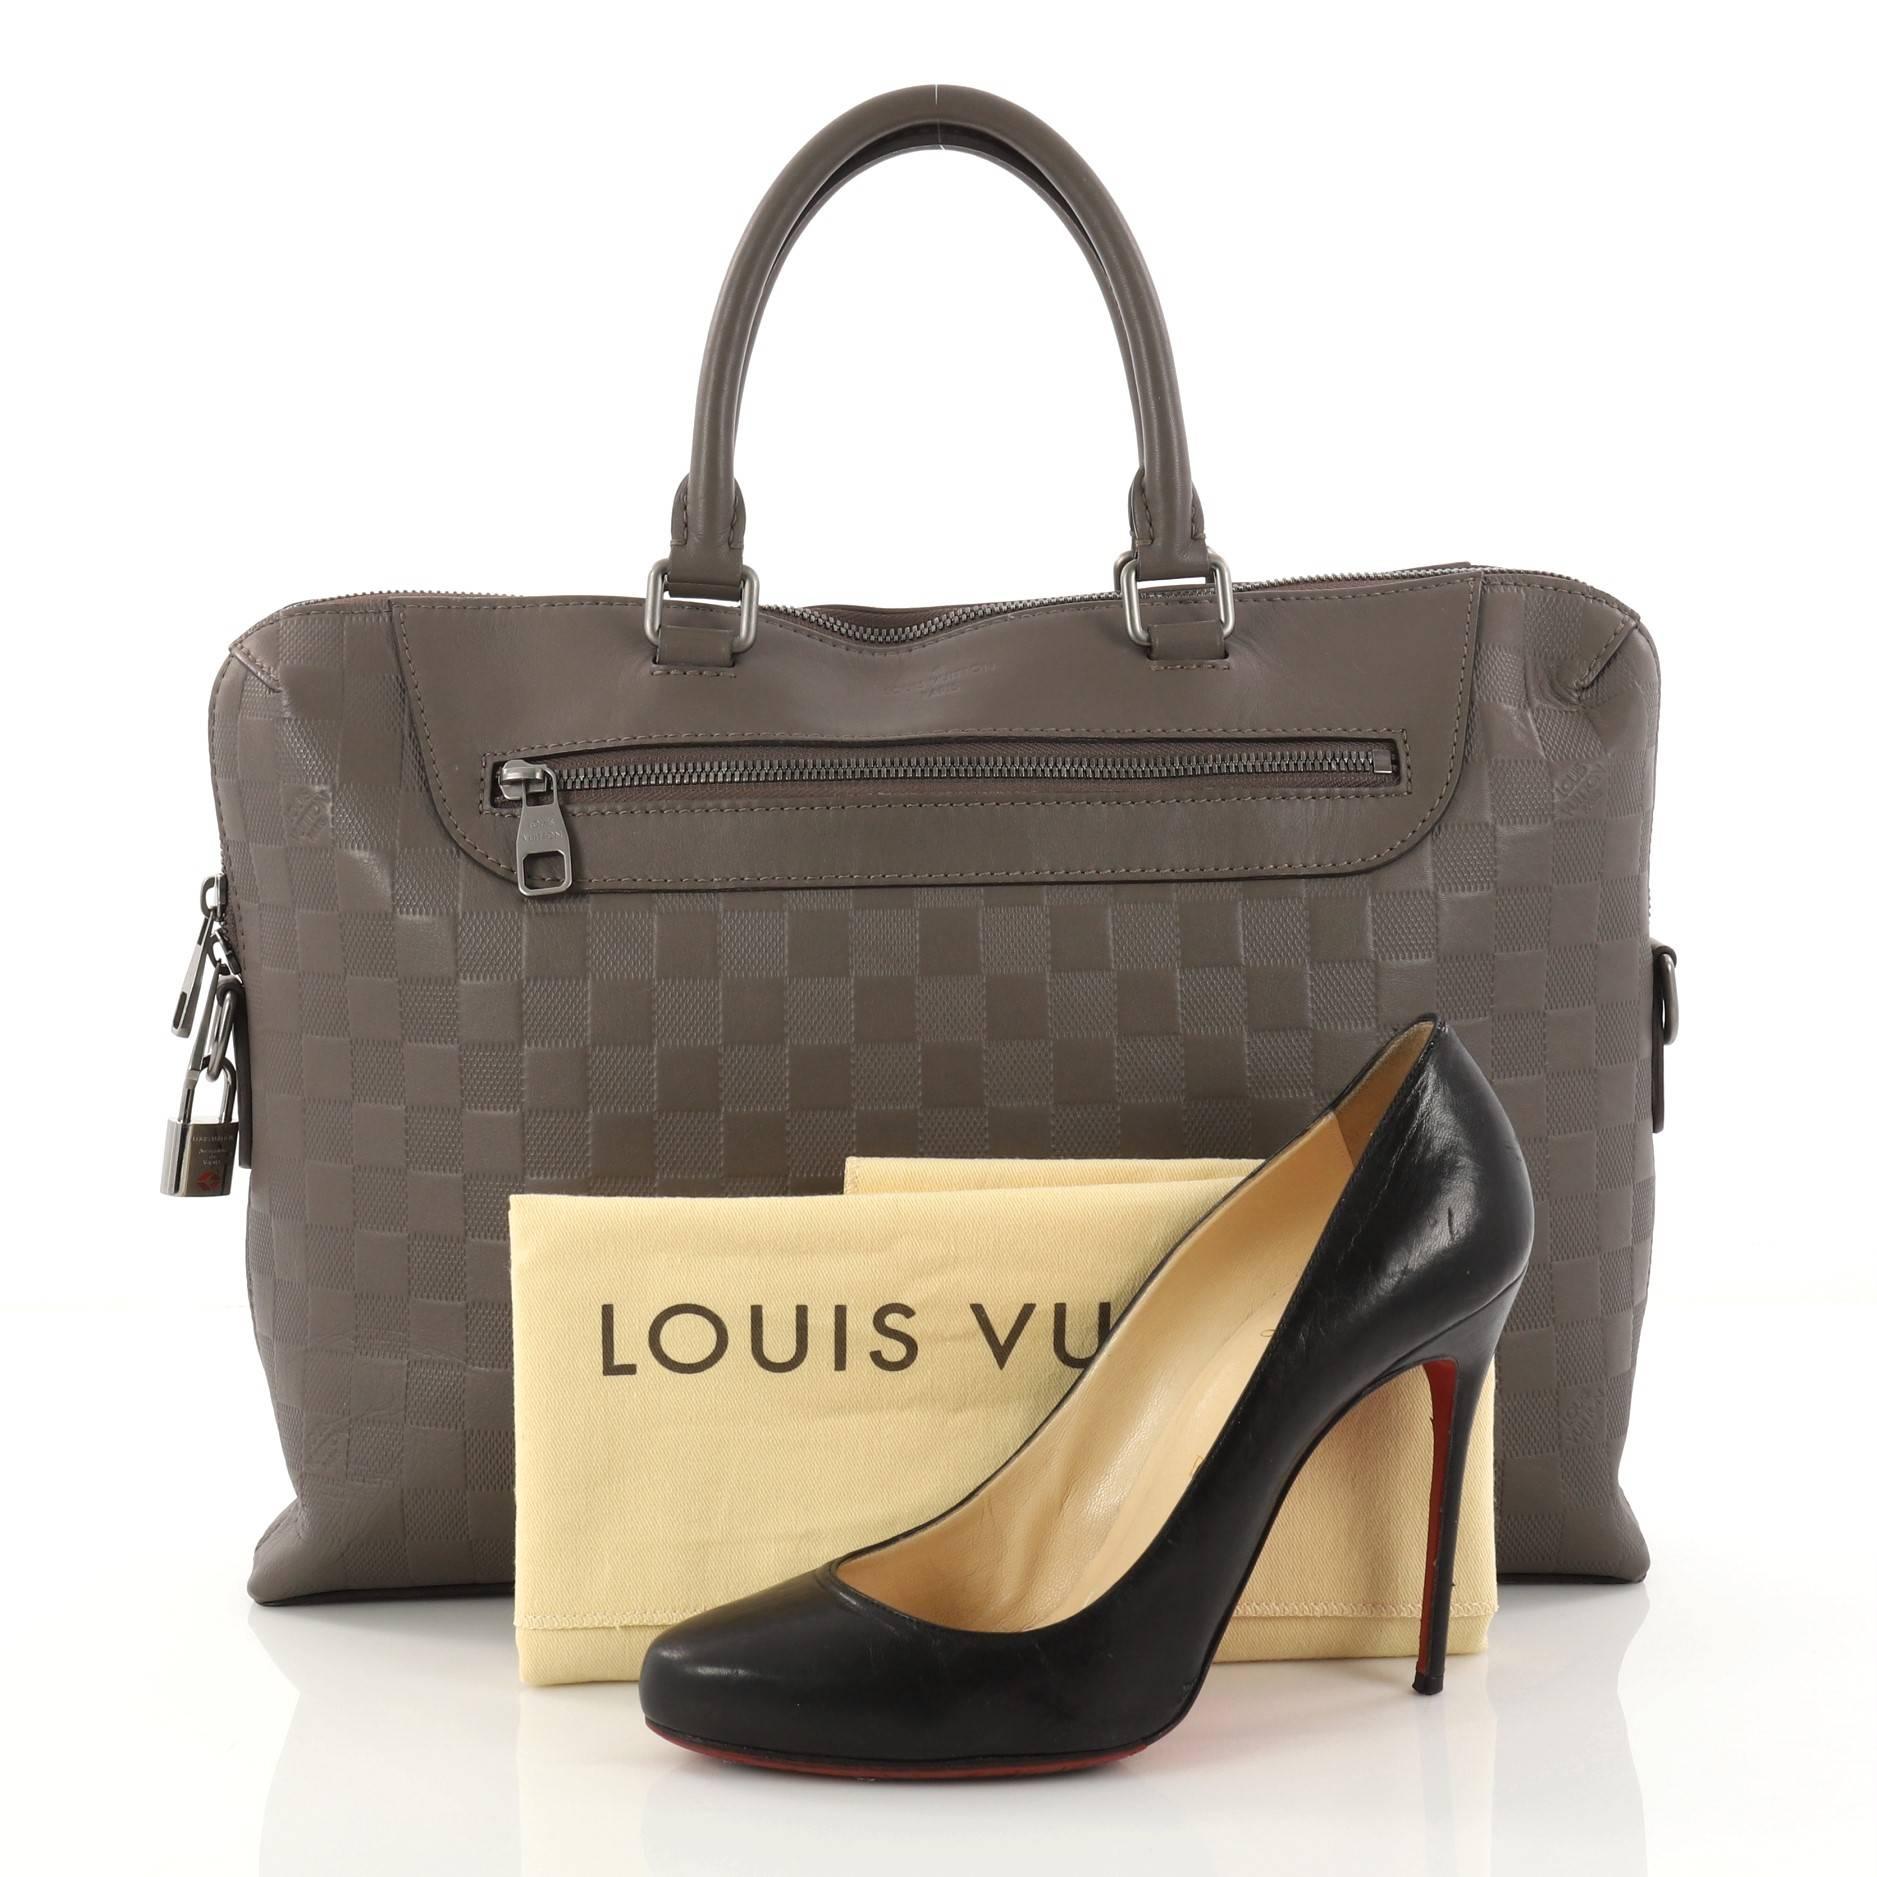 This authentic Louis Vuitton Porte-Documents Jour Bag NM Damier Infini Leather is perfect for stylish professionals. Crafted in taupe damier infini leather, this beautiful and classy bag features dual-rolled leather handles, exterior zip pocket, and